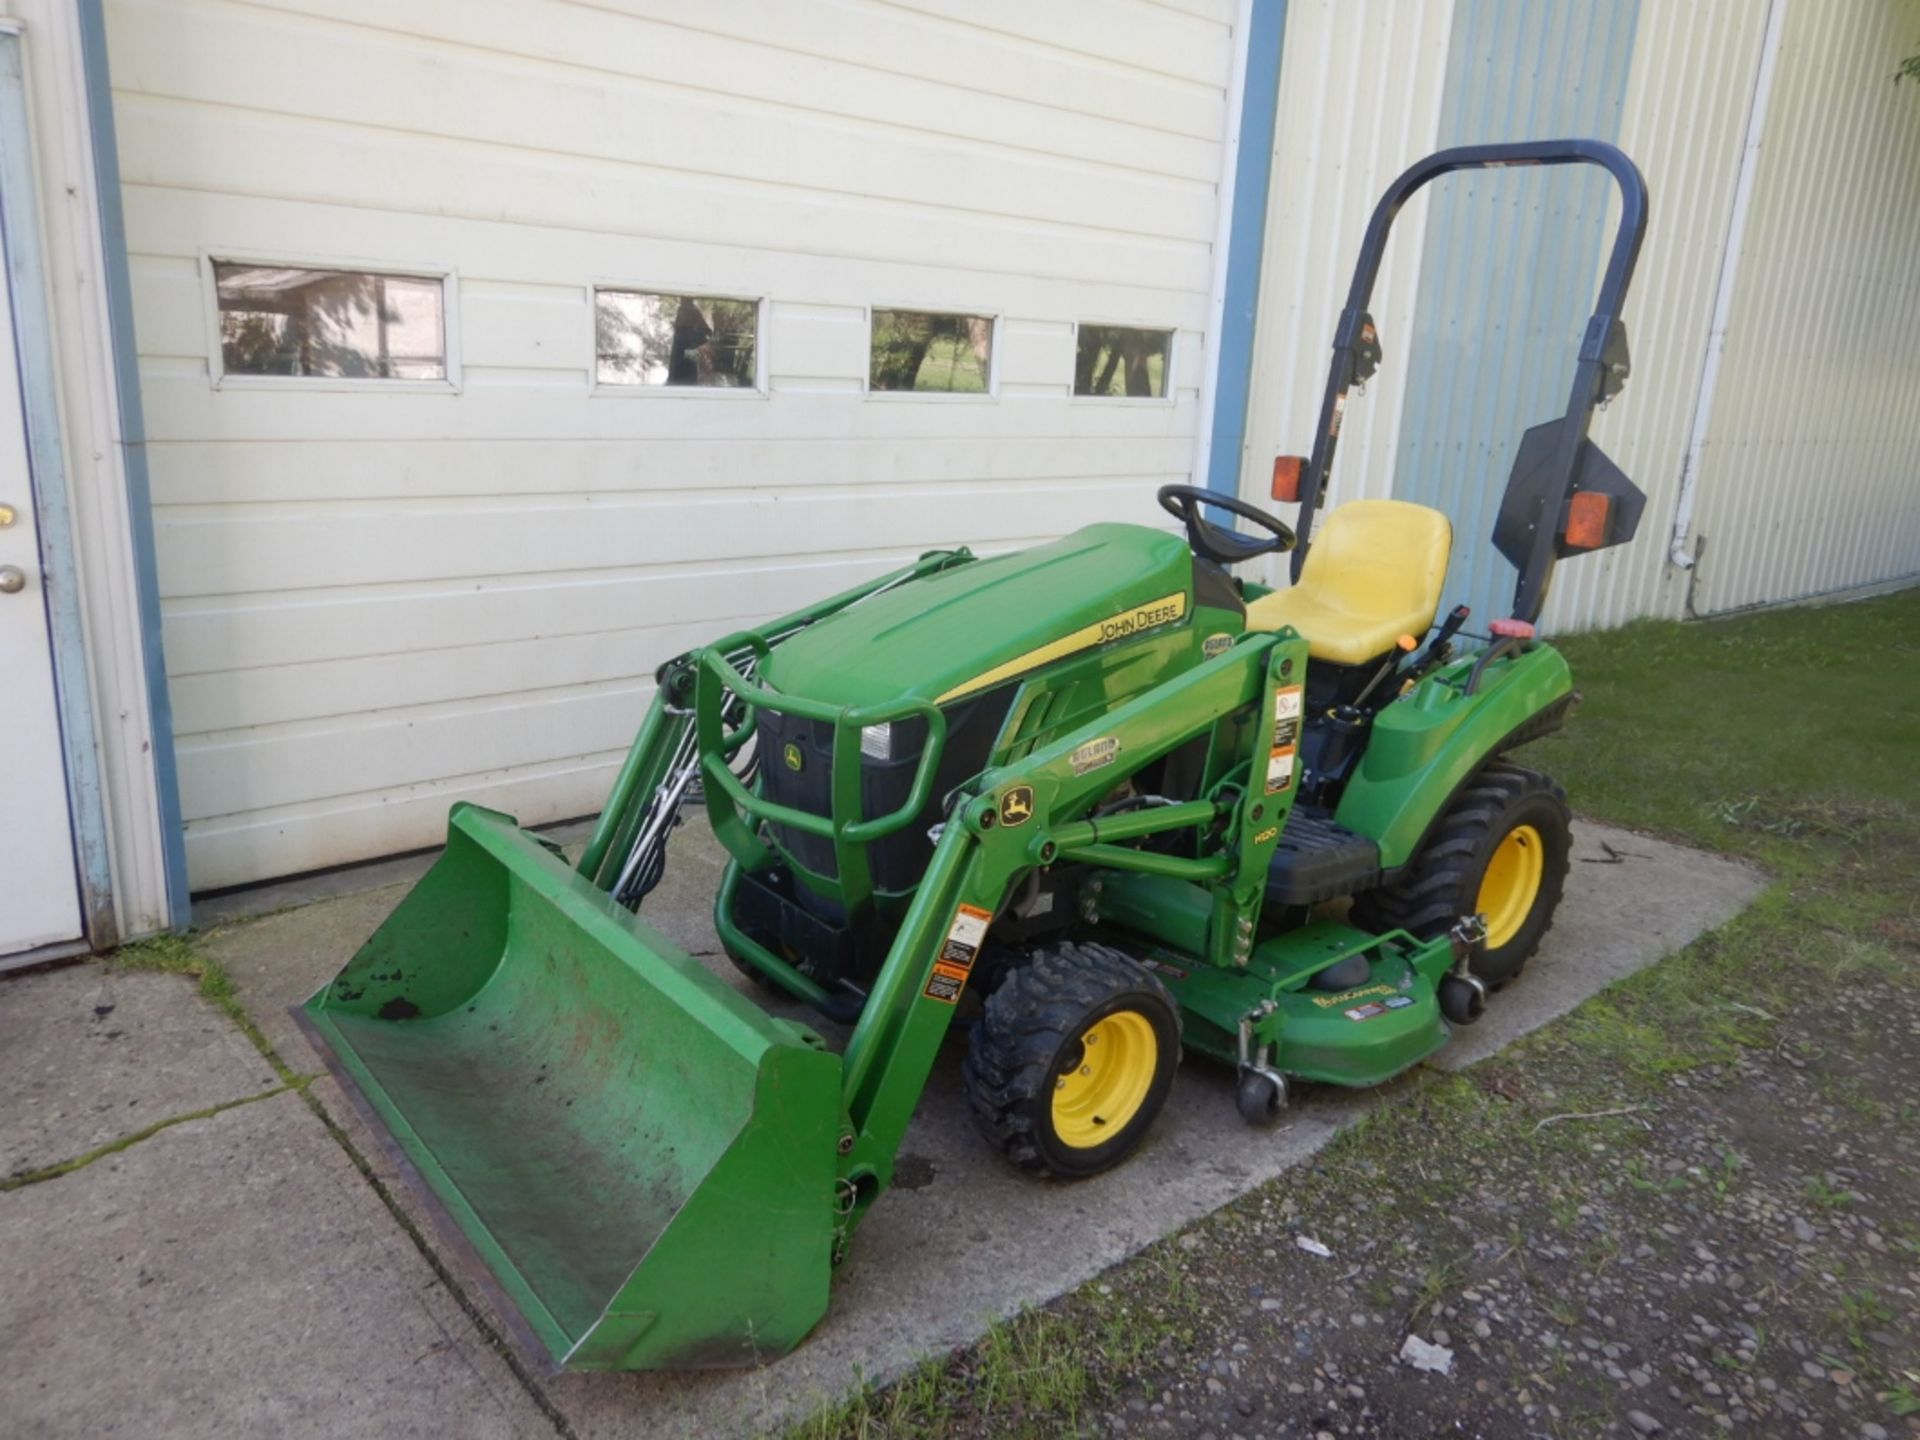 2012 JOHN DEERE 1023E 4WD COMPACT TRACTOR W/ FRONT END LOADER, 3 HYDRAULICS, DELUXE HOOD GUARD,